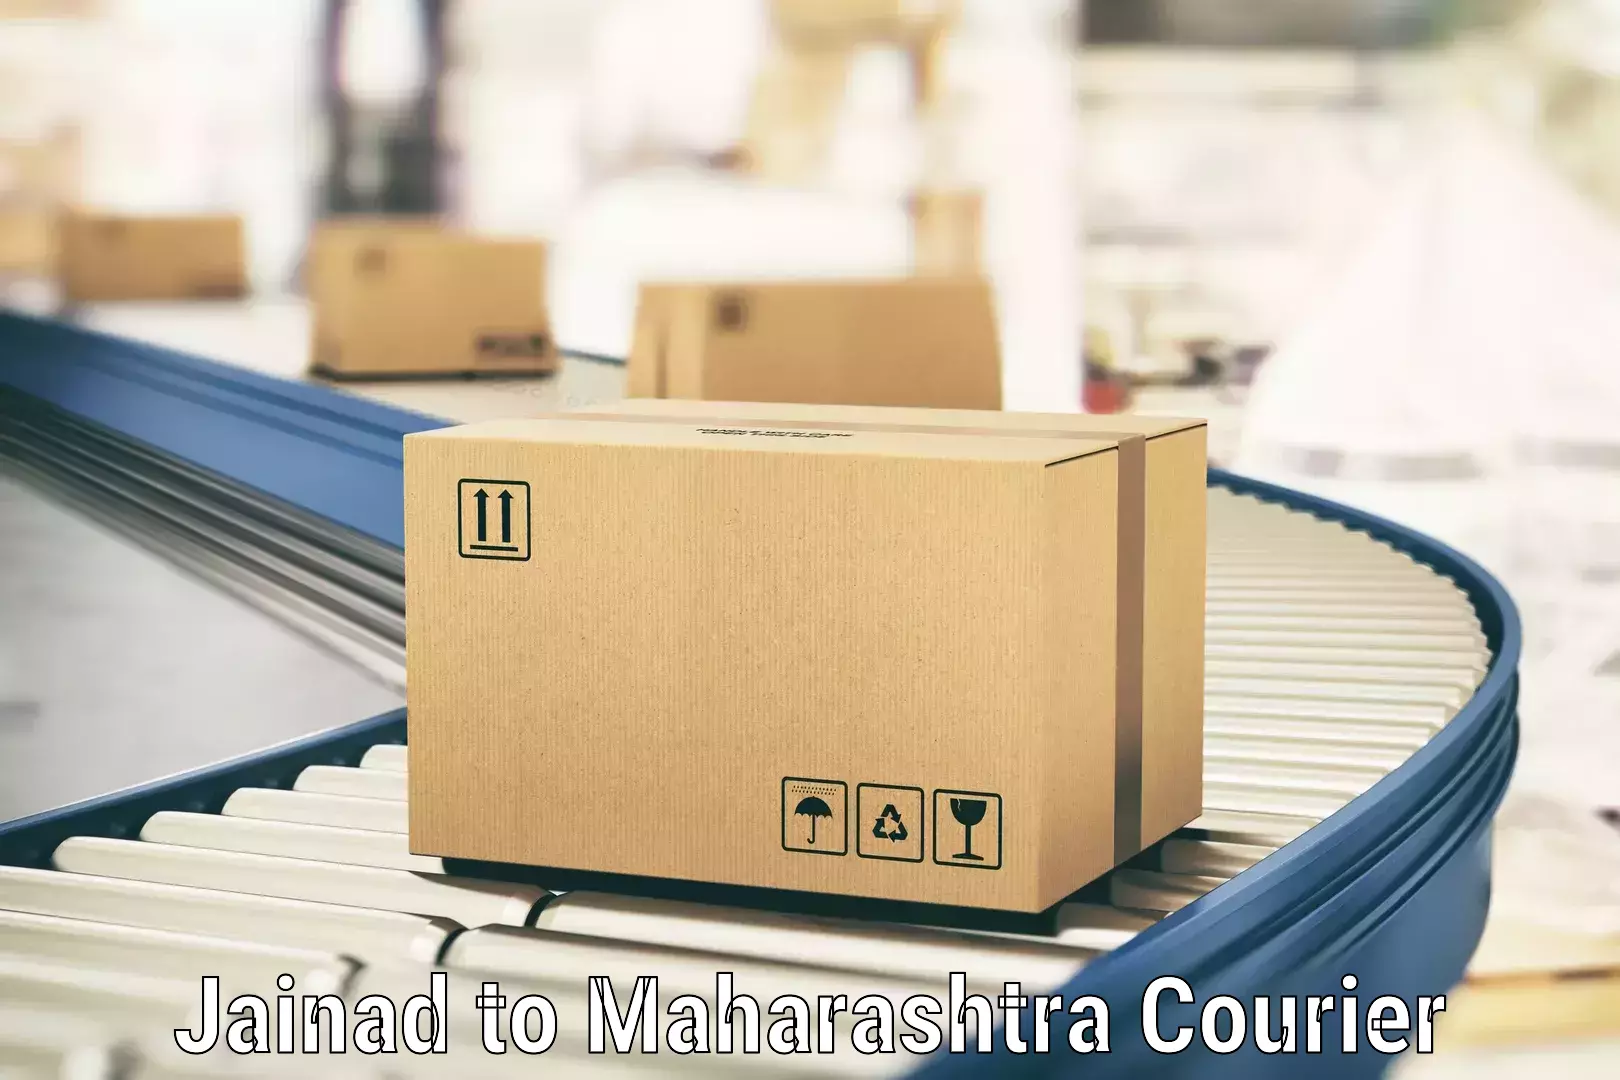 Quality courier services Jainad to Mahabaleshwar